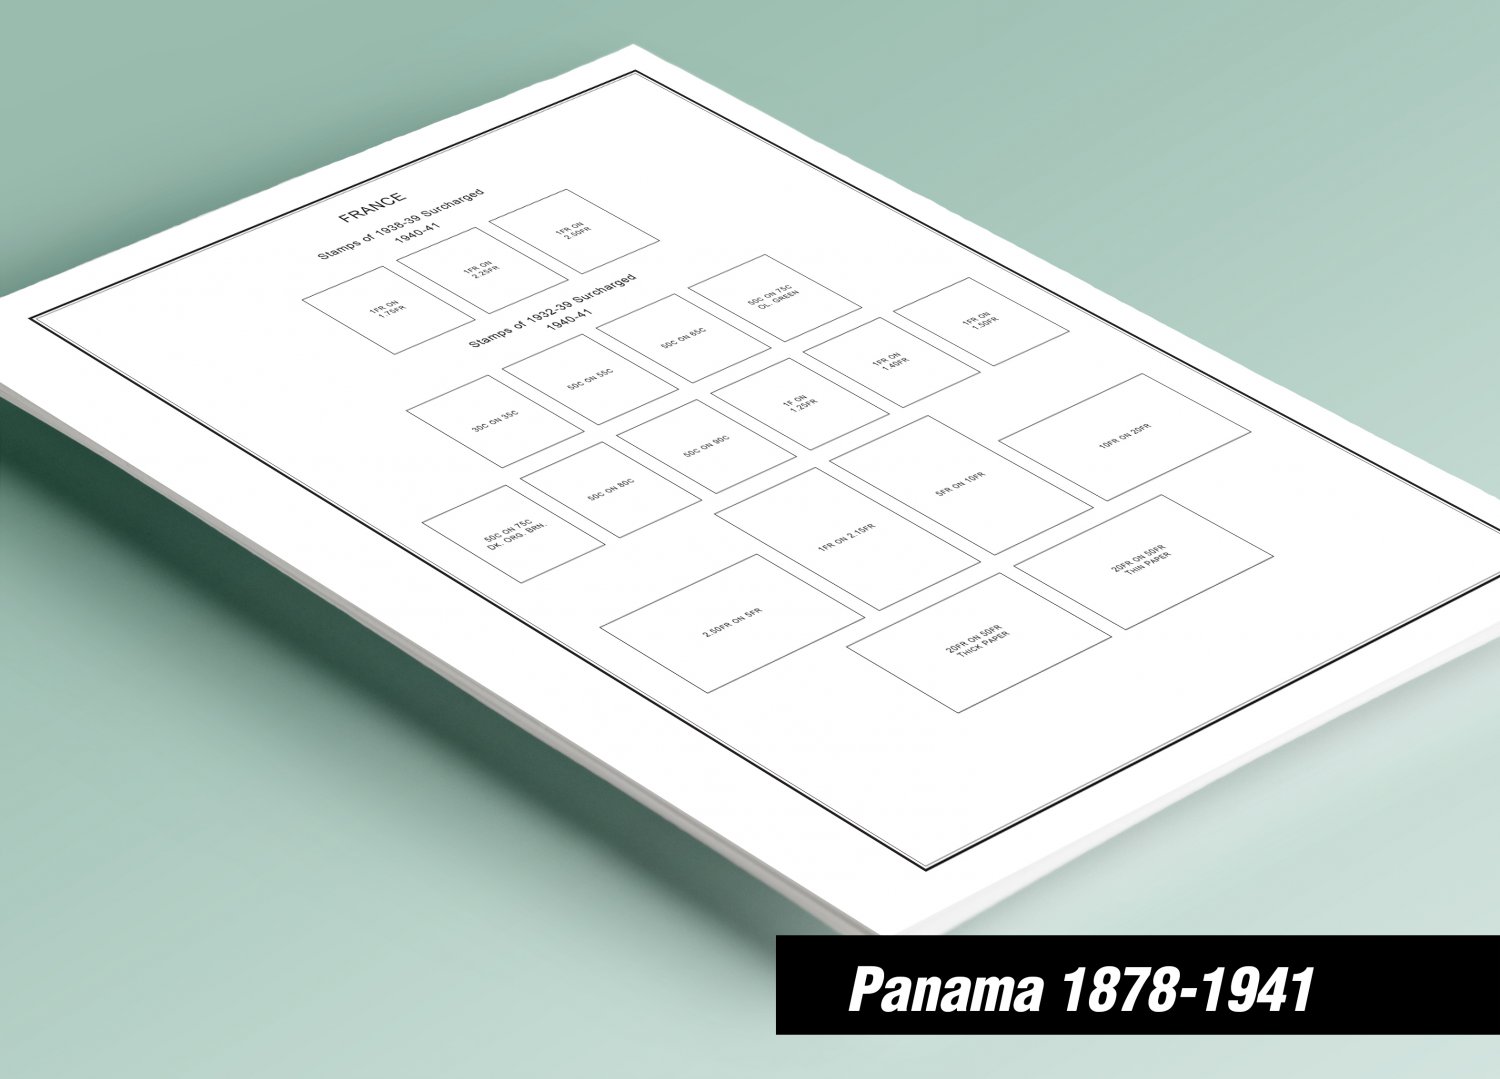 PRINTED PANAMA [CLASS.] 1878-1941 STAMP ALBUM PAGES (37 pages)